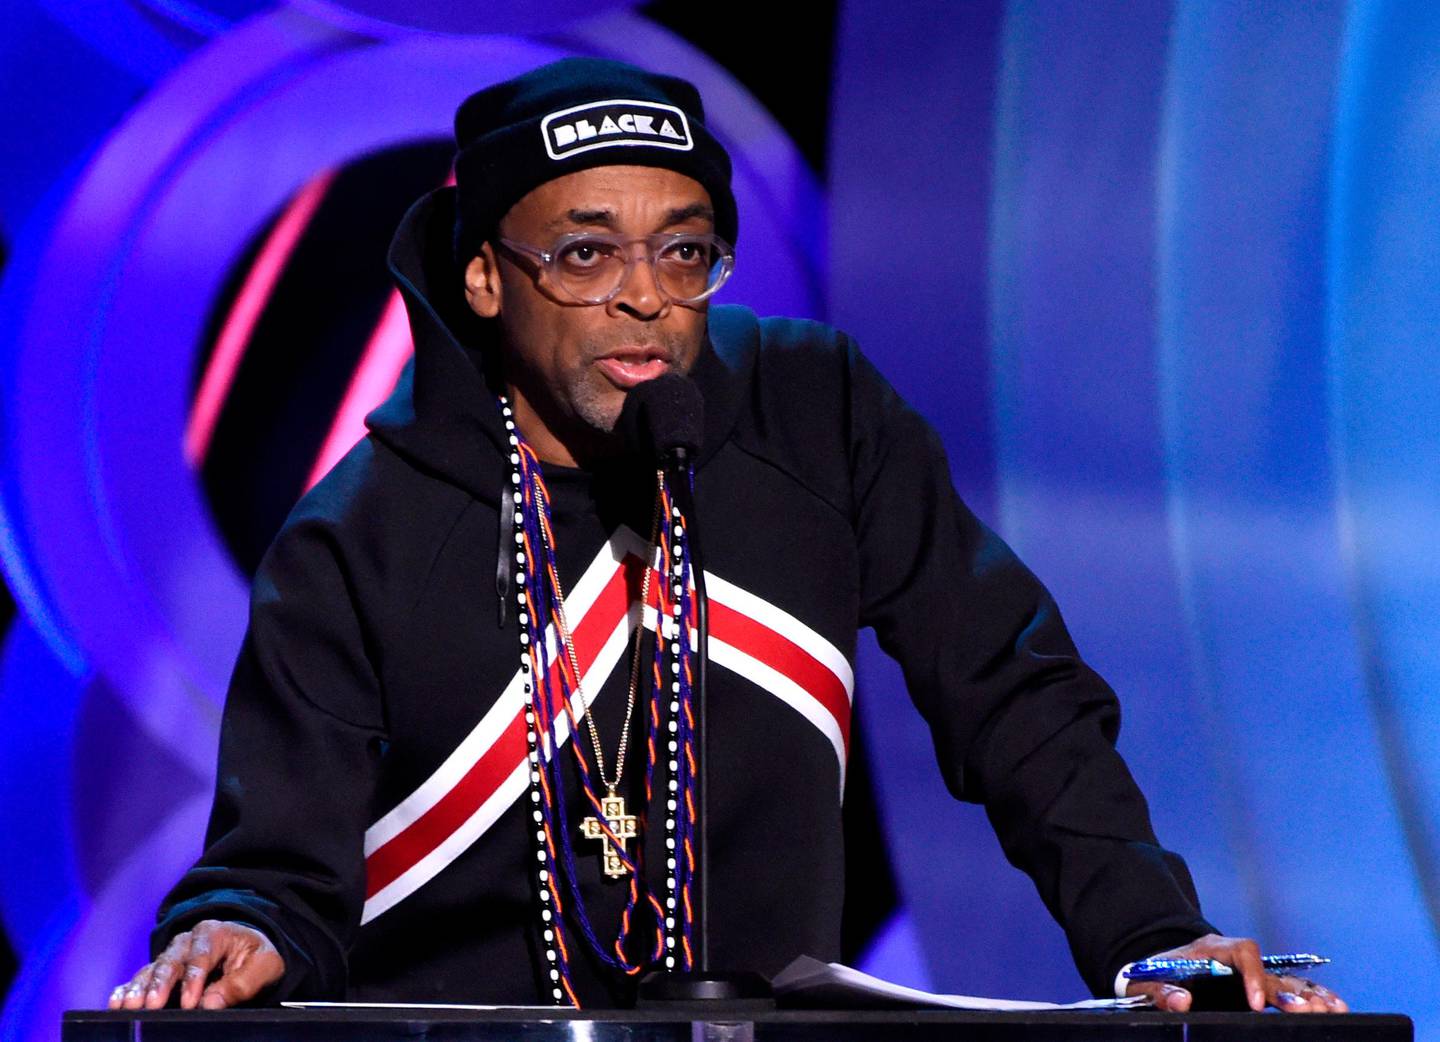 FILE - In this March 3, 2018, file photo, Spike Lee presents the award for best director at the 33rd Film Independent Spirit Awards in Santa Monica, Calif. Lee's "BlacKkKlansman" will open in theaters on the one-year anniversary of the violent protests in Charlottesville, Virginia, where white nationalists marched and a counterprotester was killed. Focus Features on Monday, April 9, 2018, announced that Lee's newly retitled drama will be released Aug. 10. (Photo by Chris Pizzello/Invision/AP, File)